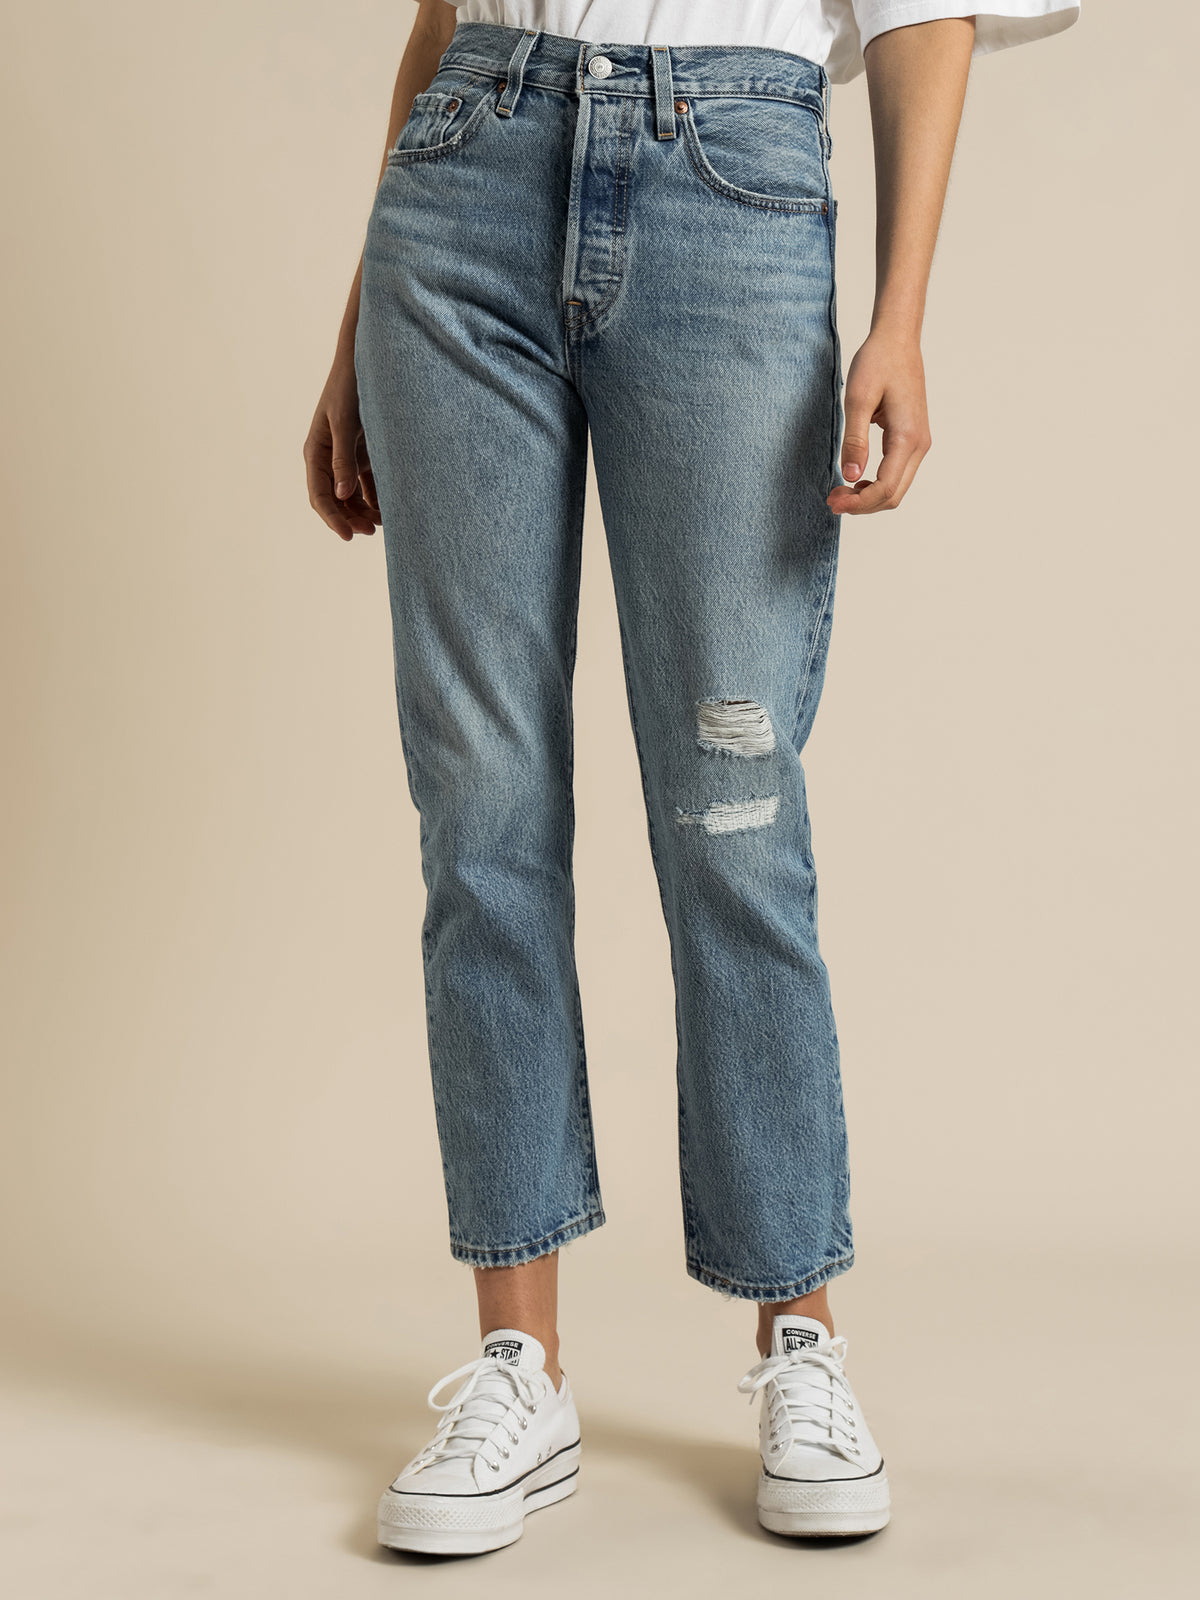 501 Original Cropped Jeans in Luxor Reconstruction